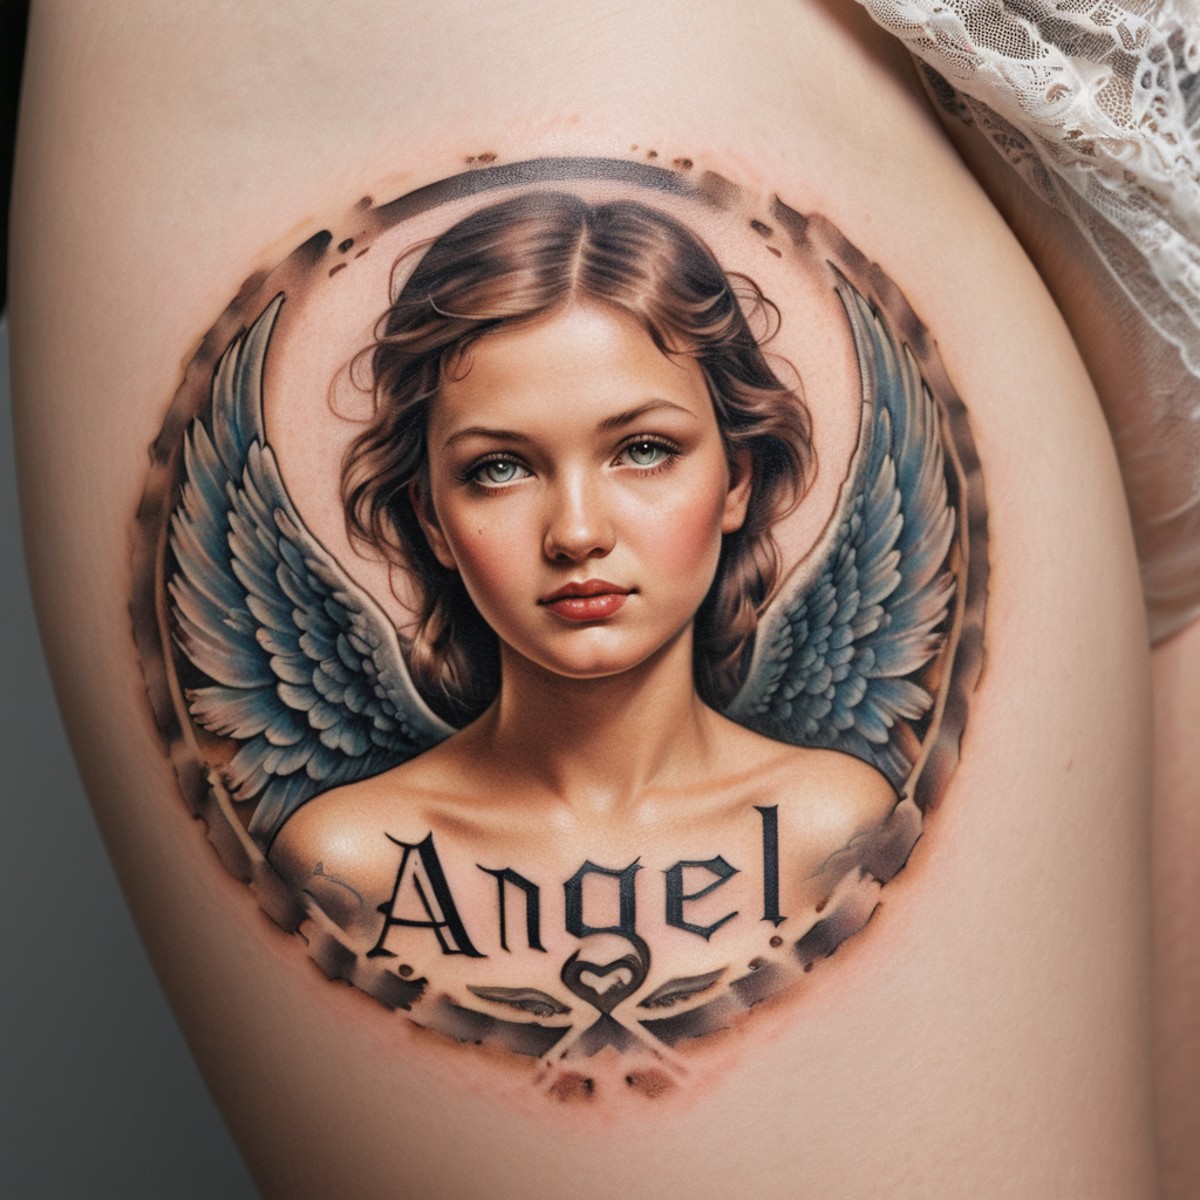 (Angel:1.5) text logo, photograph, old time tattoo on skin, Caucasian woman